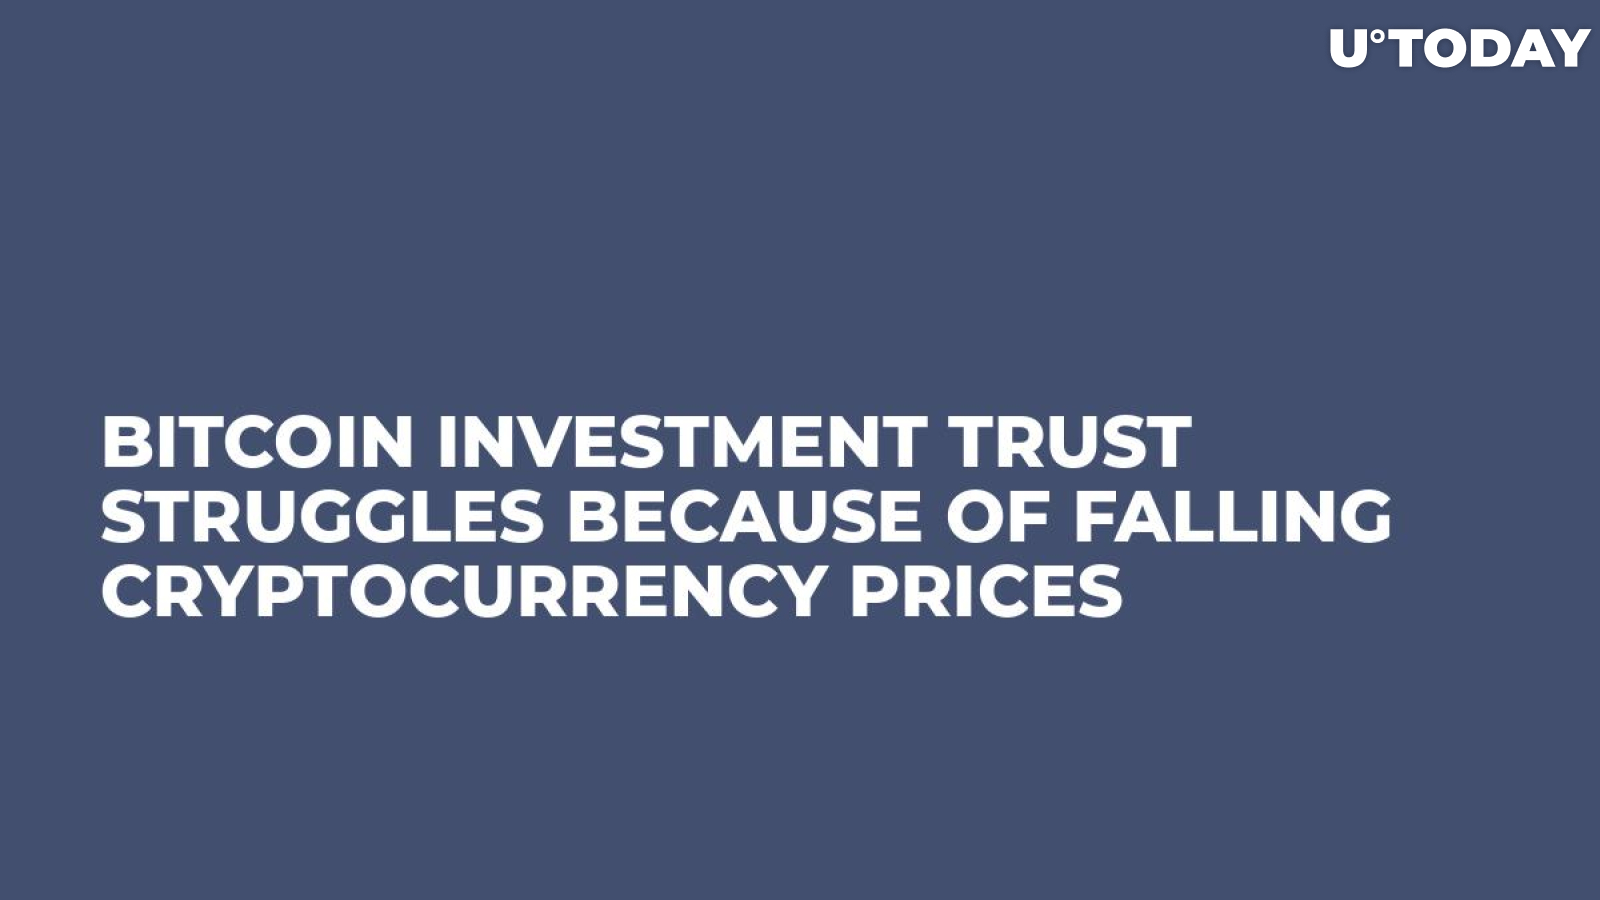 Bitcoin Investment Trust Struggles Because of Falling Cryptocurrency Prices 